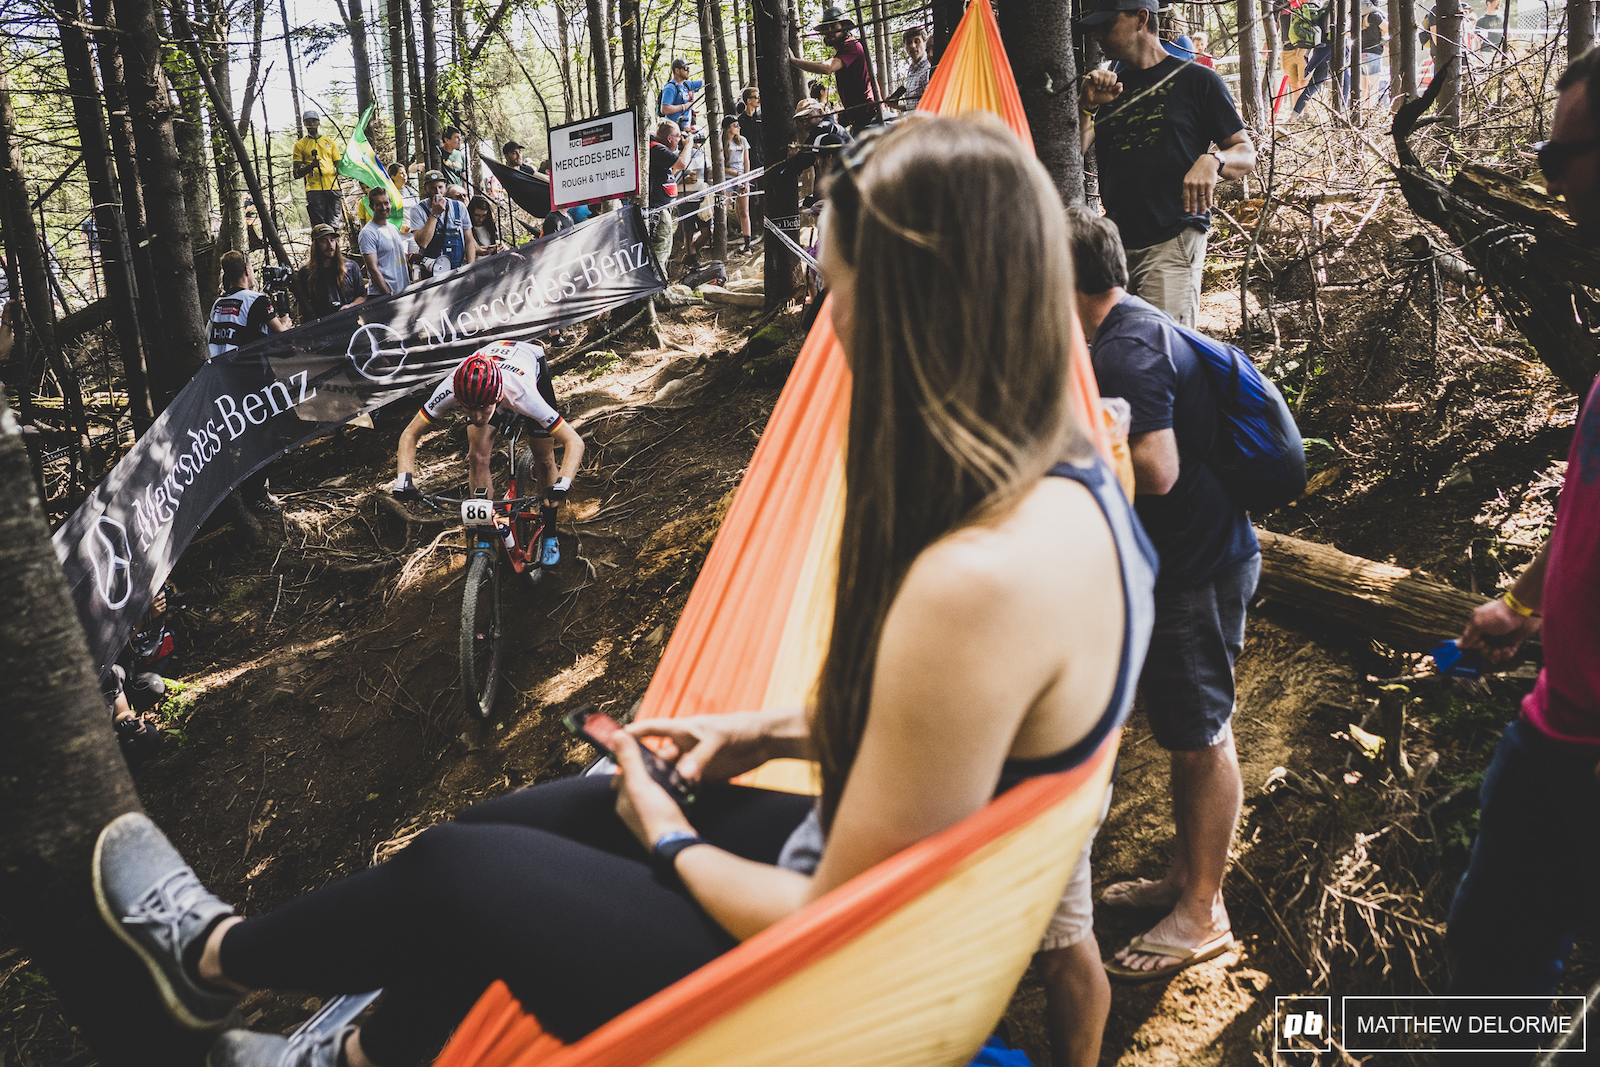 Prime spectating spots are key when you spend the day partying in the woods.